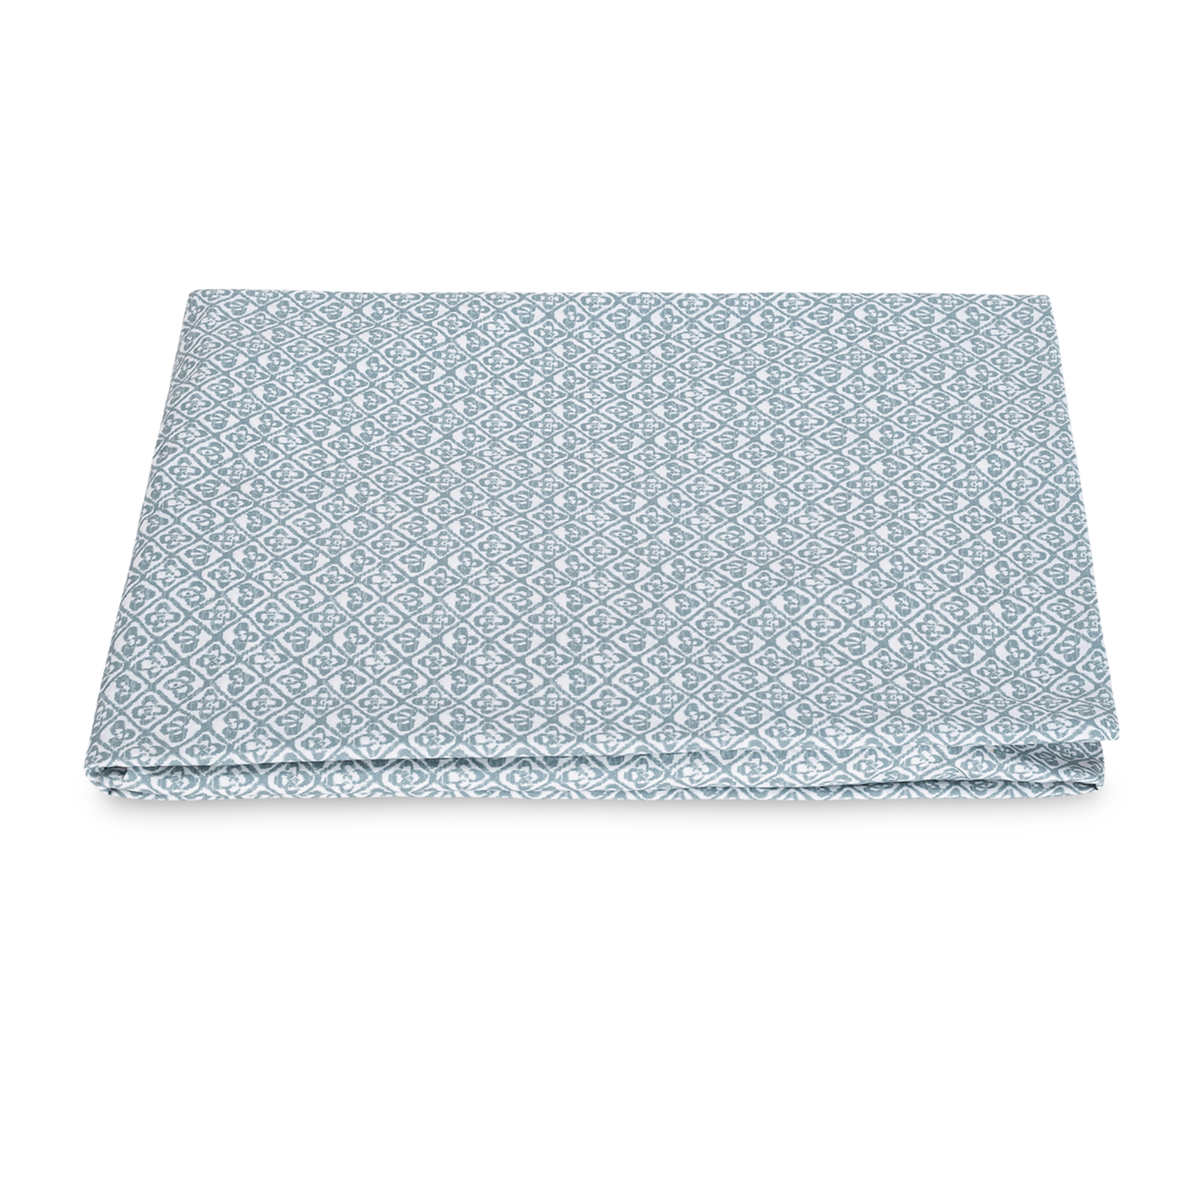 Folded Fitted Sheet of Matouk Schumacher Catarina Bedding in Hazy Blue Color